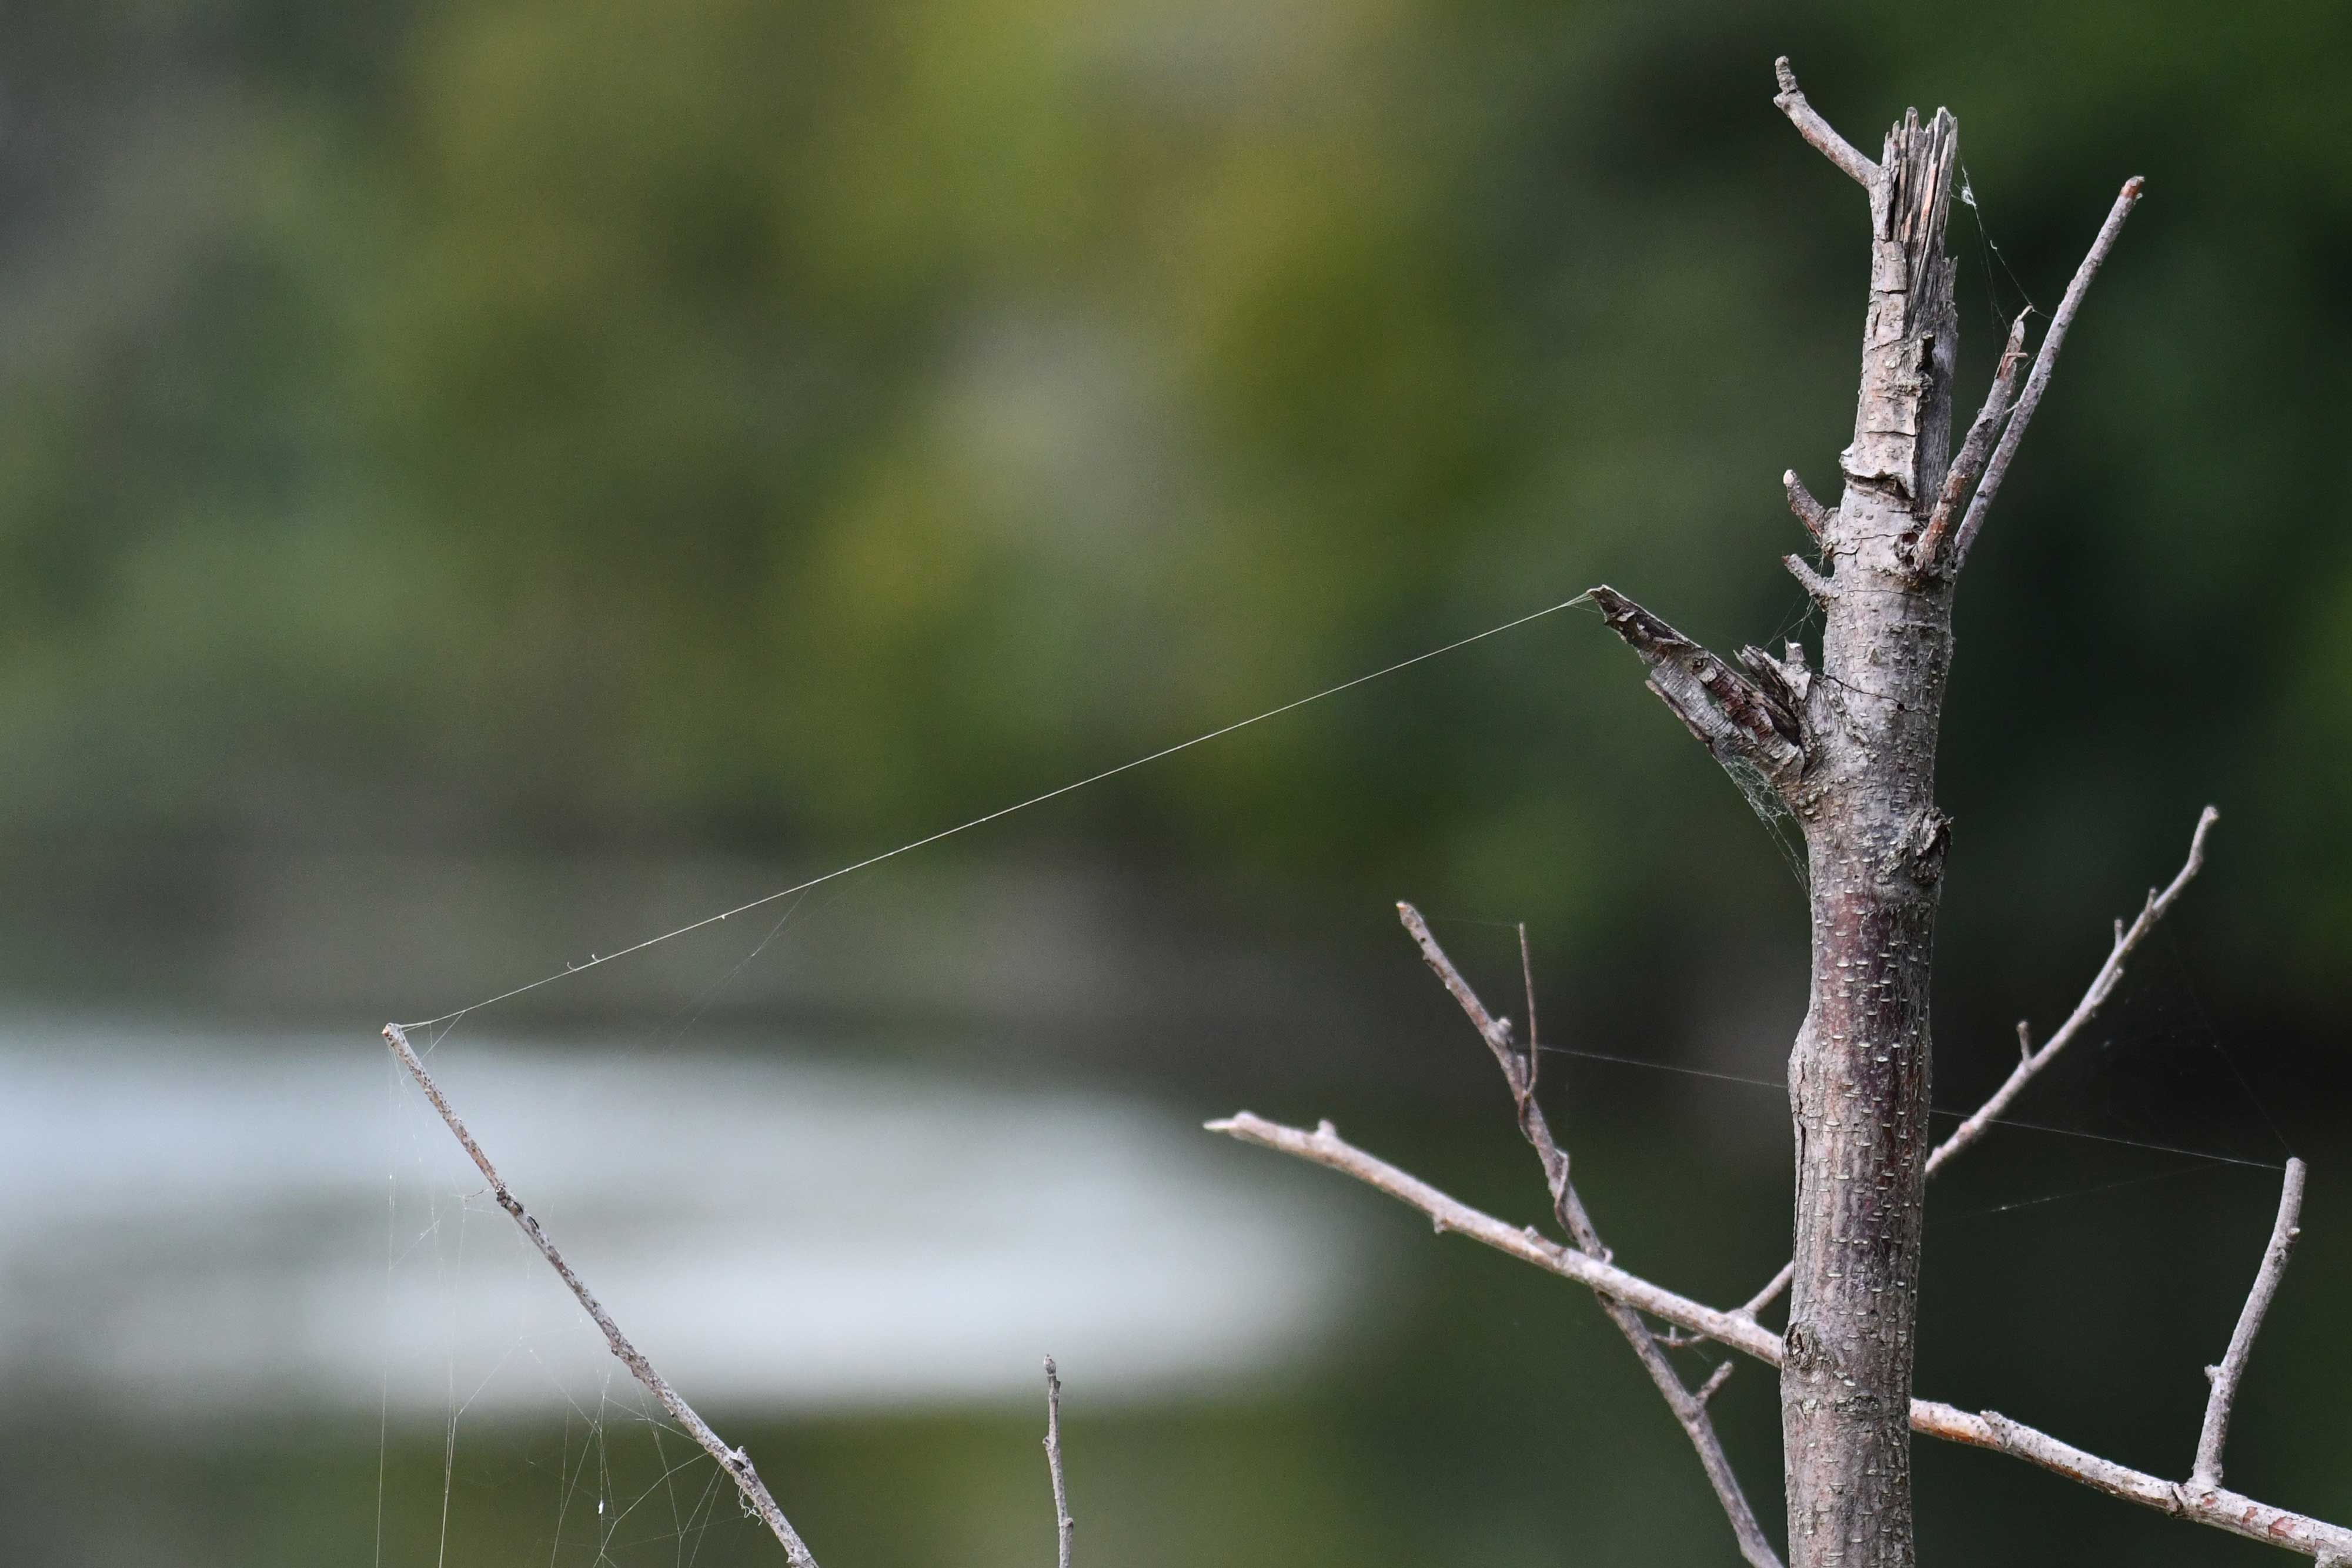 A spiderweb on a tree branch.